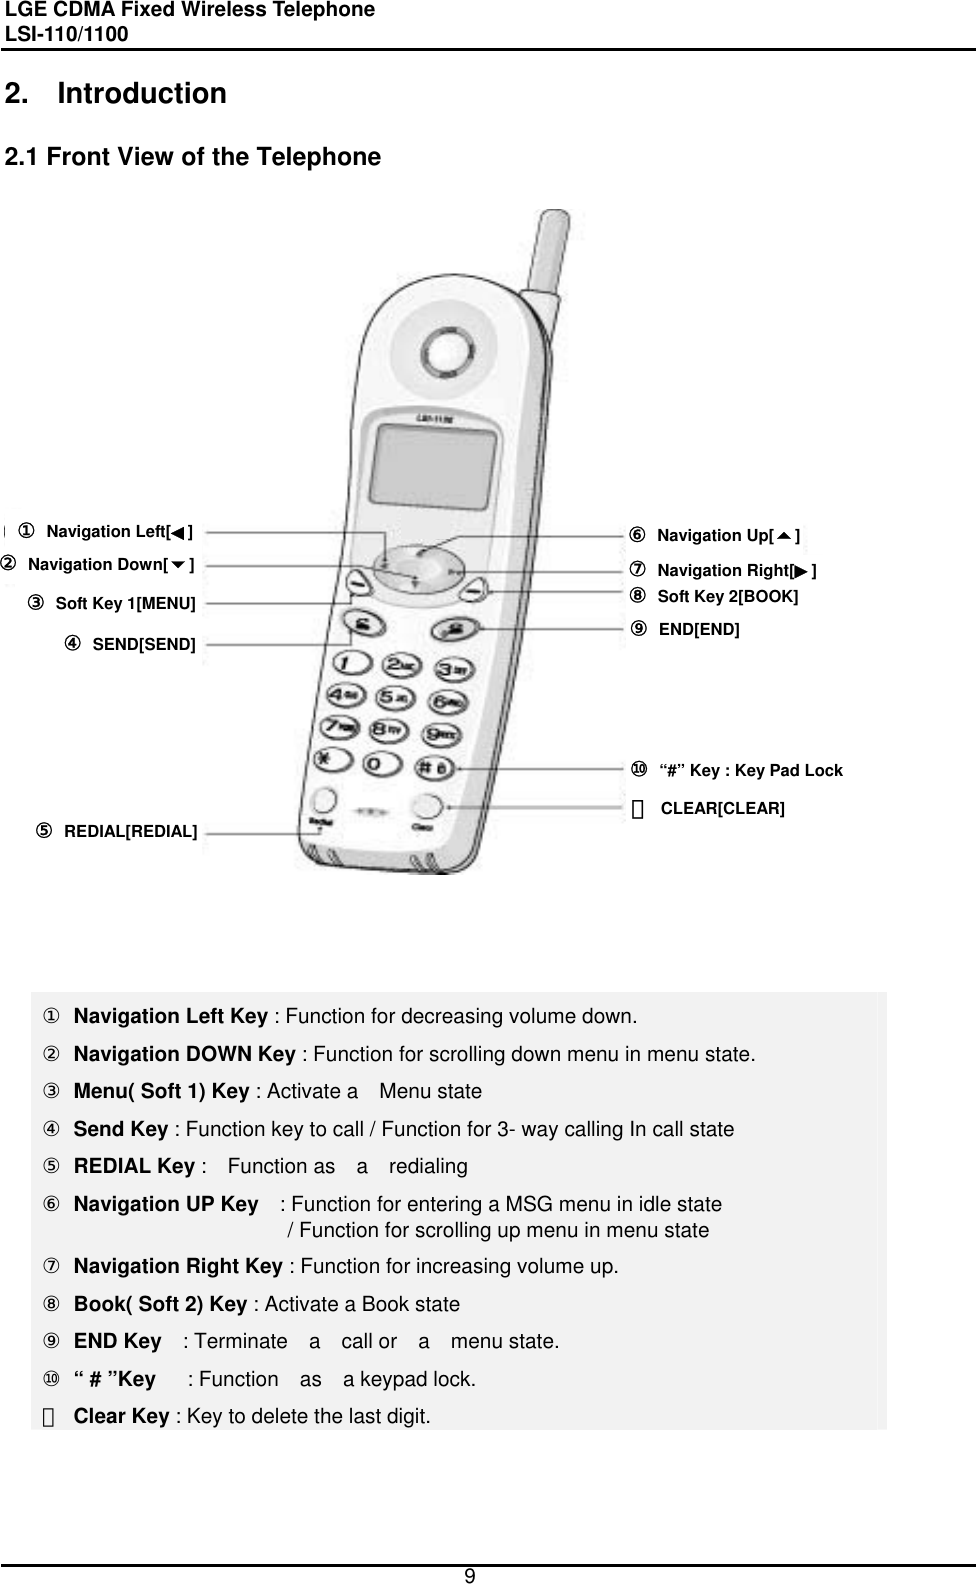 LGE CDMA Fixed Wireless Telephone                                       LSI-110/1100     9 2. Introduction  2.1 Front View of the Telephone                              ① Navigation Left Key : Function for decreasing volume down.     ② Navigation DOWN Key : Function for scrolling down menu in menu state.     ③ Menu( Soft 1) Key : Activate a    Menu state ④ Send Key : Function key to call / Function for 3- way calling In call state   ⑤ REDIAL Key :  Function as  a  redialing ⑥ Navigation UP Key    : Function for entering a MSG menu in idle state                 / Function for scrolling up menu in menu state  ⑦ Navigation Right Key : Function for increasing volume up. ⑧ Book( Soft 2) Key : Activate a Book state ⑨ END Key  : Terminate  a  call or  a  menu state. ⑩ “ # ”Key   : Function  as  a keypad lock. ⑪ Clear Key : Key to delete the last digit. ① Navigation Left[◀] ⑦ Navigation Right[▶] ⑥ Navigation Up[] ② Navigation Down[] ③  Soft Key 1[MENU] ④ SEND[SEND] ⑤ REDIAL[REDIAL] ⑧  Soft Key 2[BOOK] ⑨ END[END] ⑪ CLEAR[CLEAR] ⑩  “#” Key : Key Pad Lock 